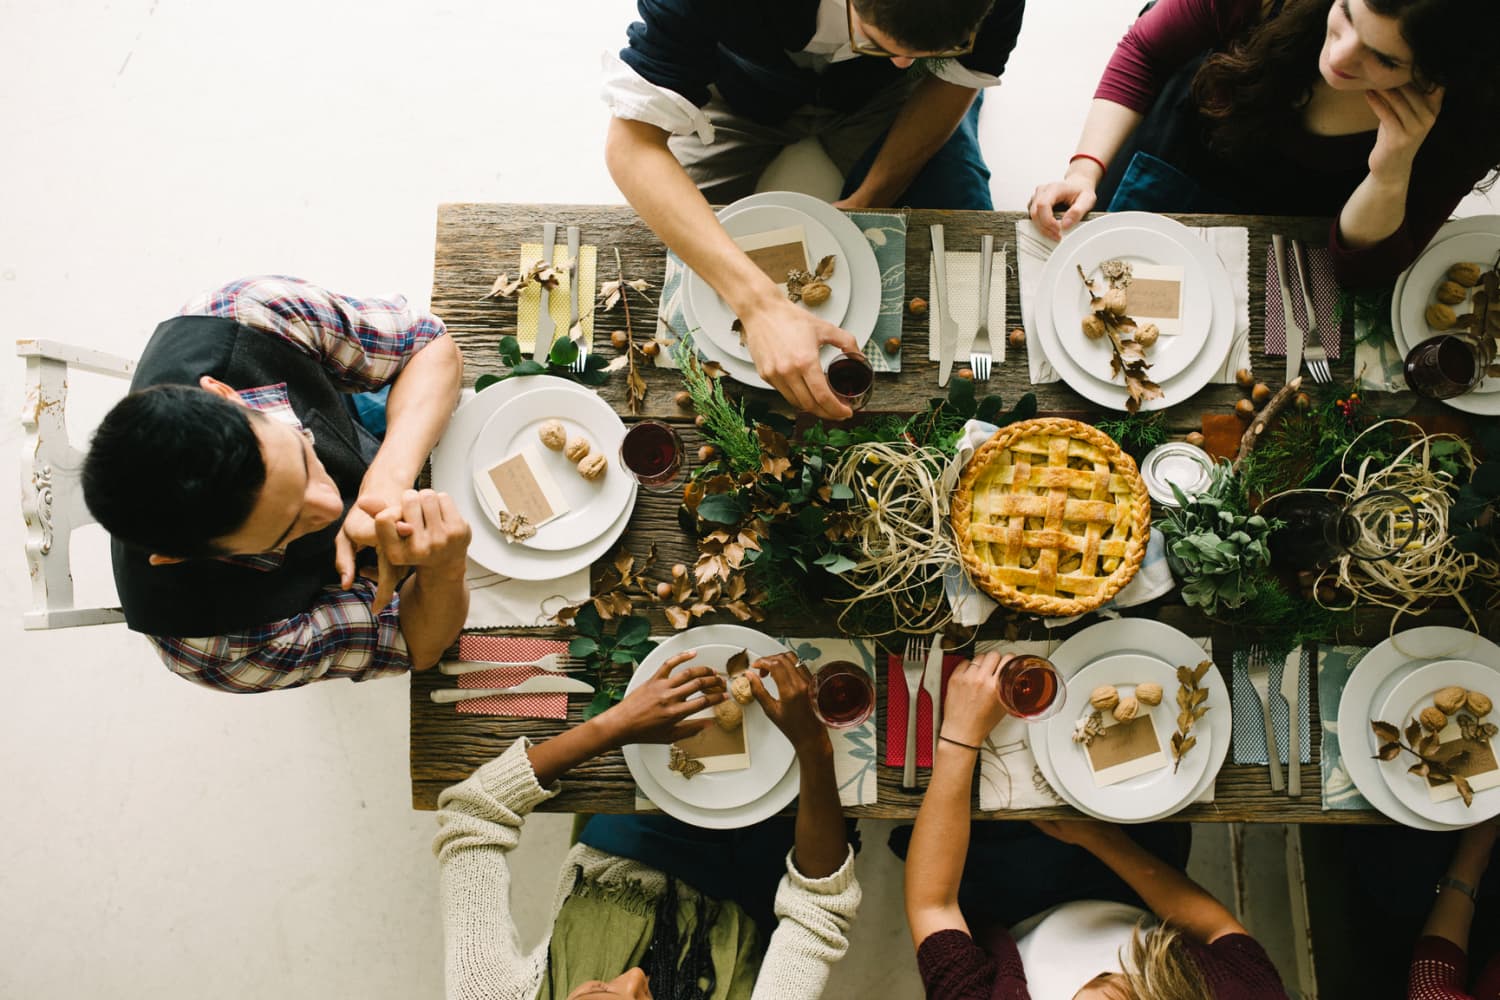 7 Tips for Setting Boundaries with Family Over the Holidays